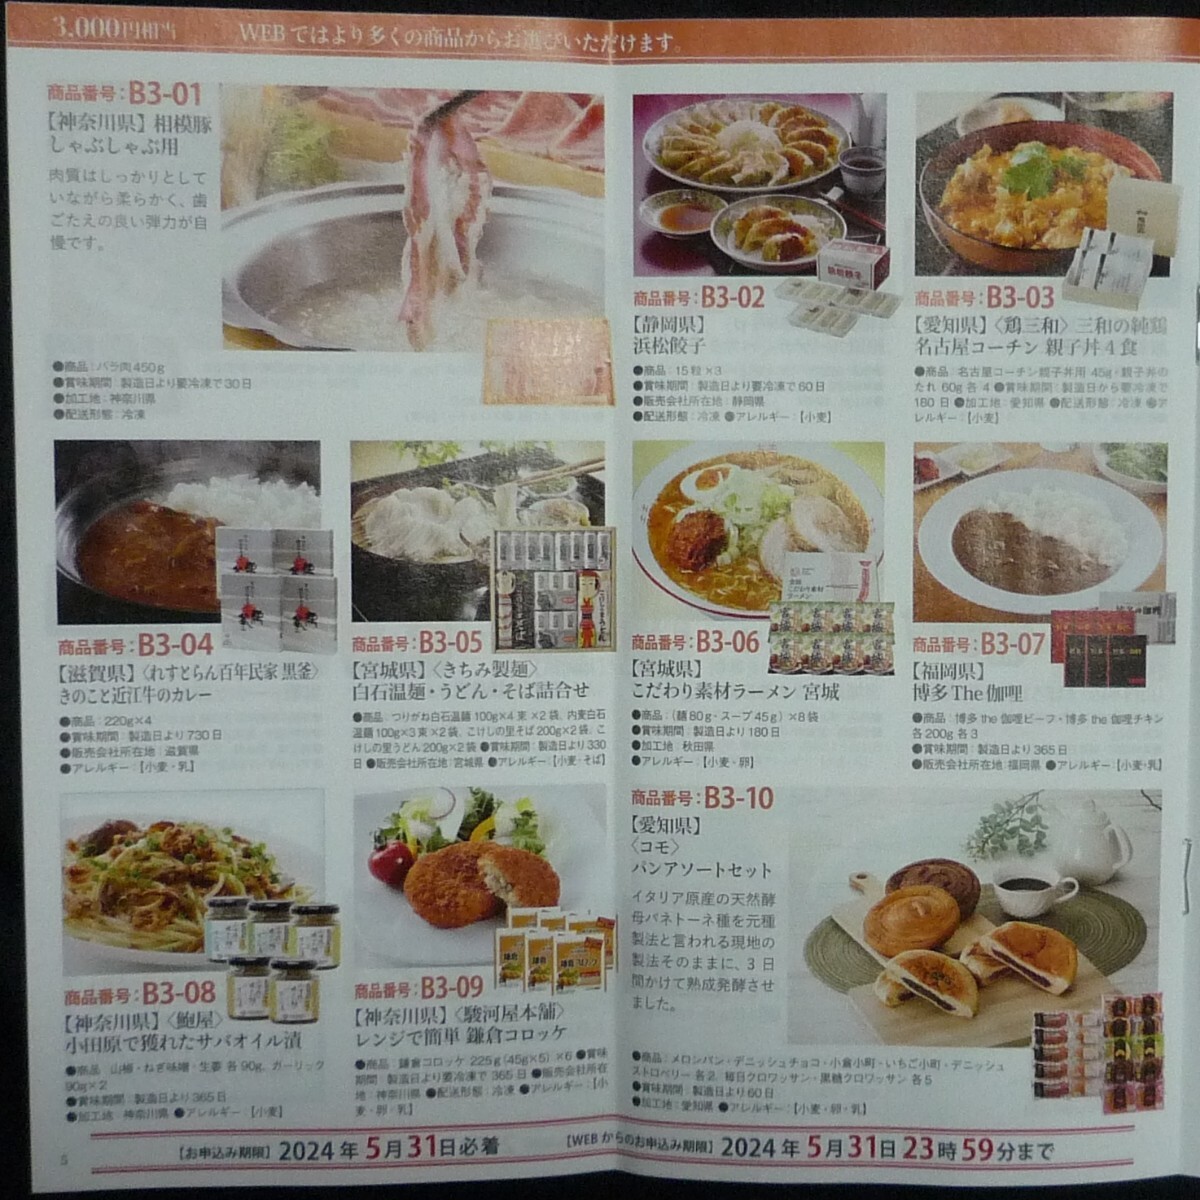  free shipping equipped the same day correspondence * catalog gift 3000 jpy corresponding Tokai carbon stockholder hospitality . included postcard gift catalog rice meat food Point .. newest prompt decision 